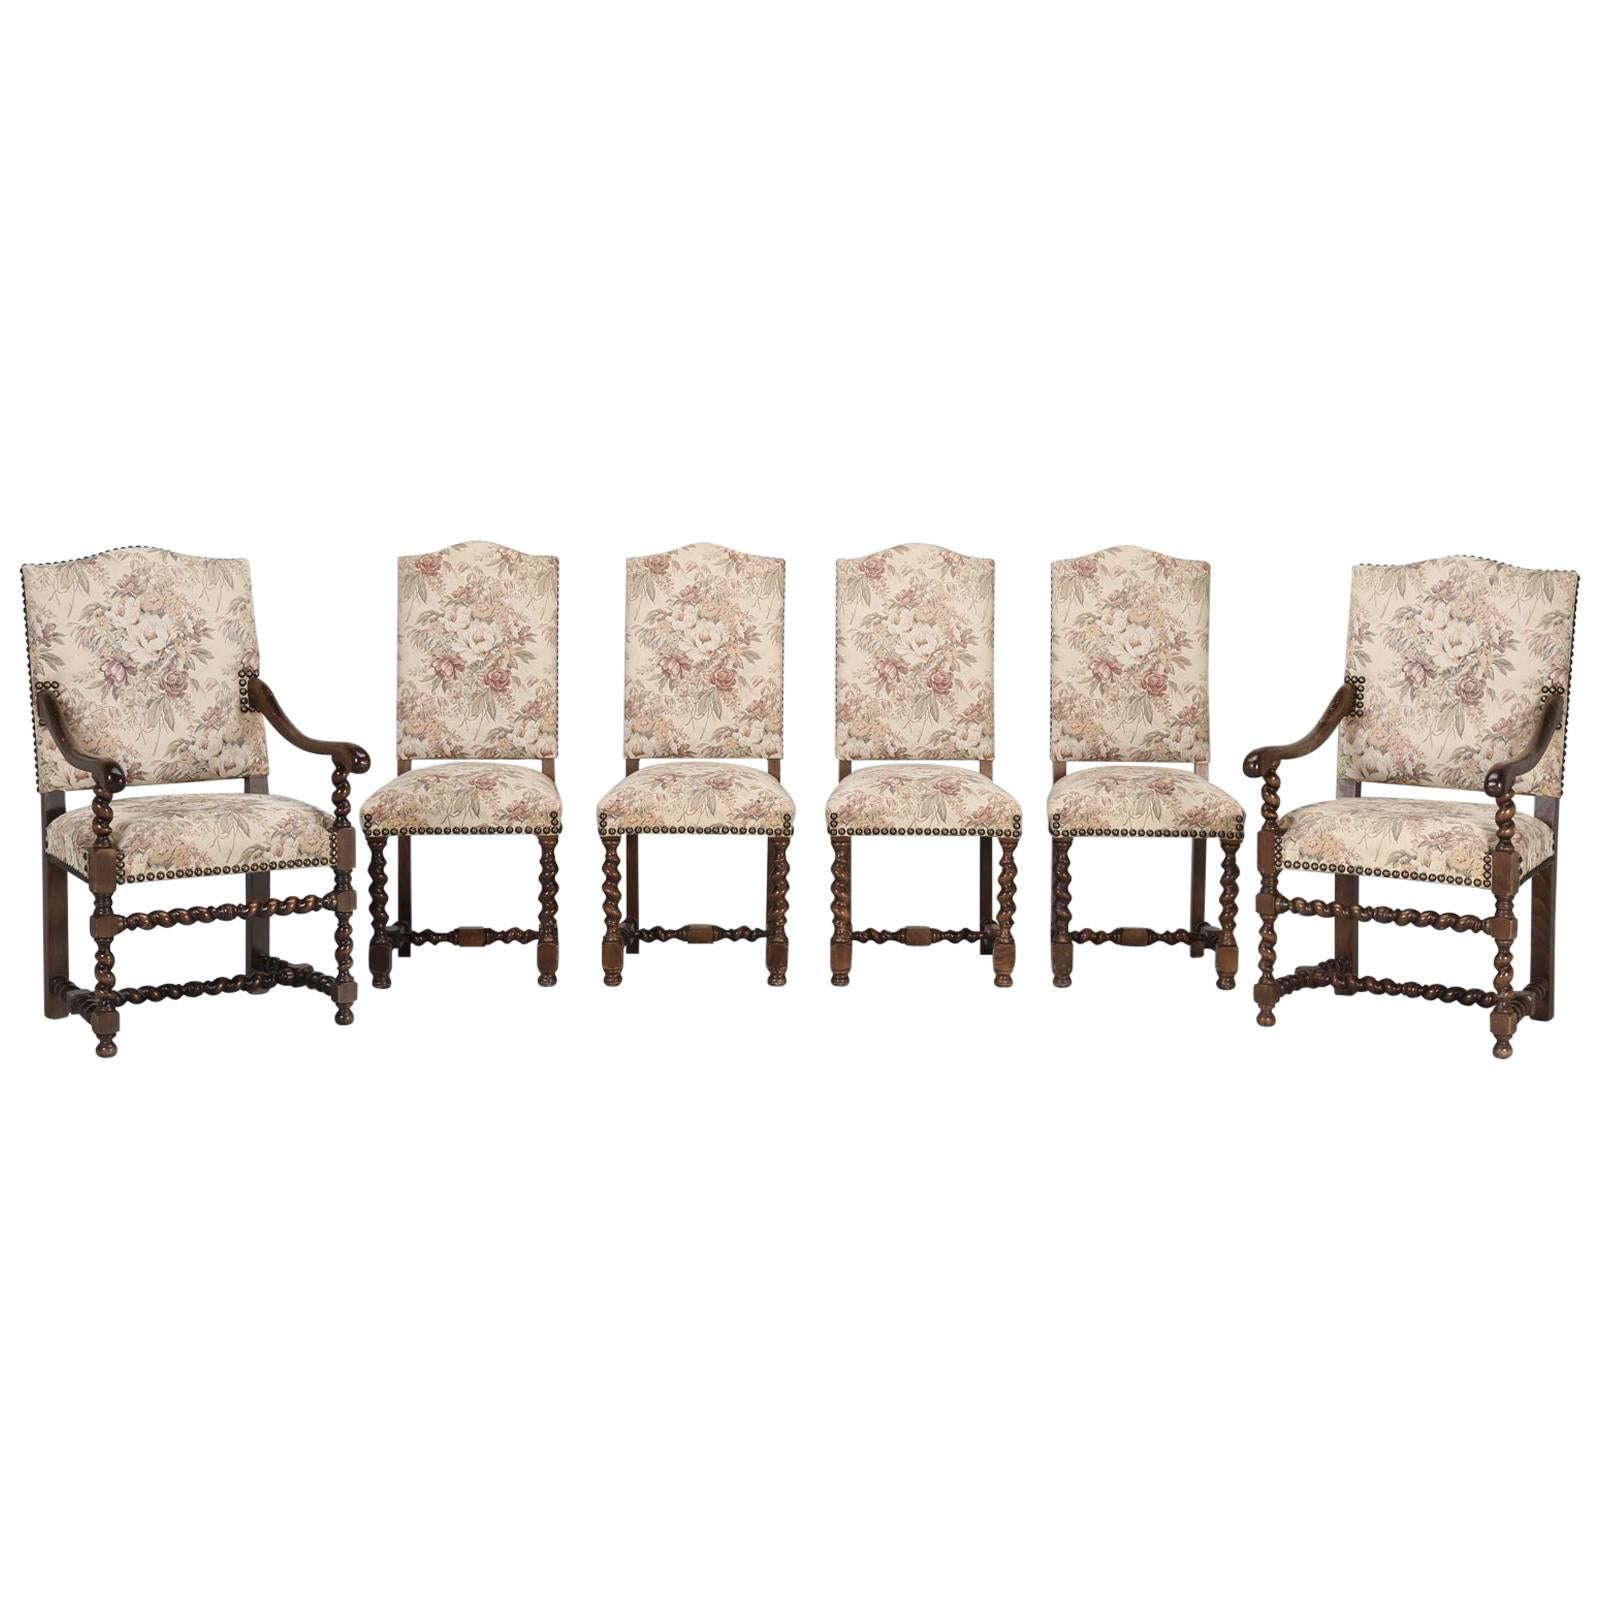 Antique French Barley Twist Dining Chairs, Set of Six in as Found Condition